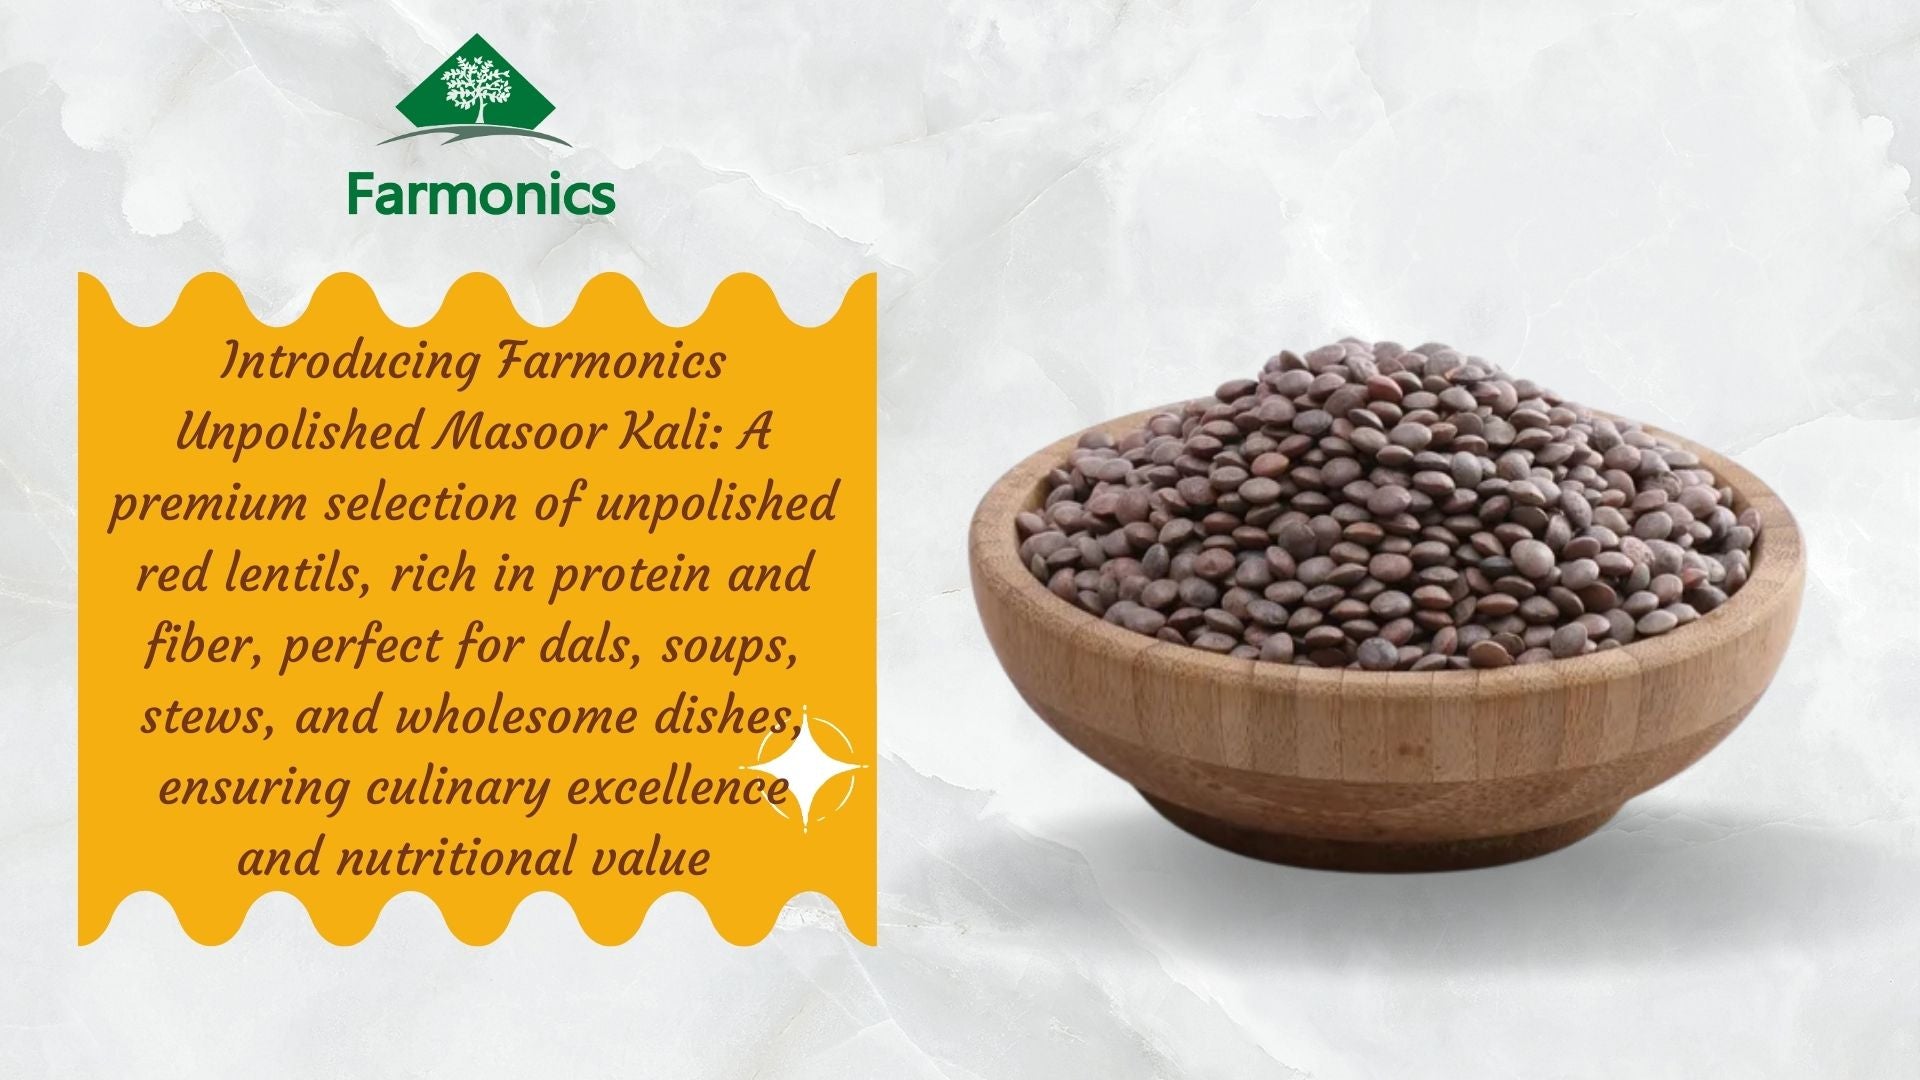  Here are some of the information about farmonics premioum quality   kali masoor